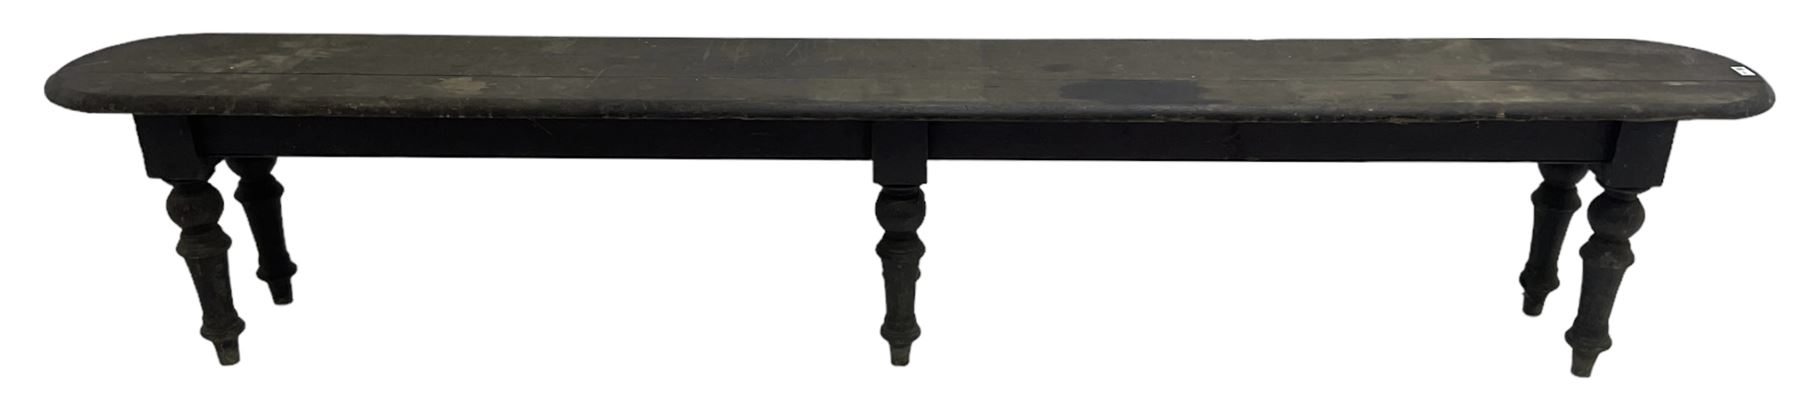 Large 19th century stained oak 9' hall bench - Image 6 of 8